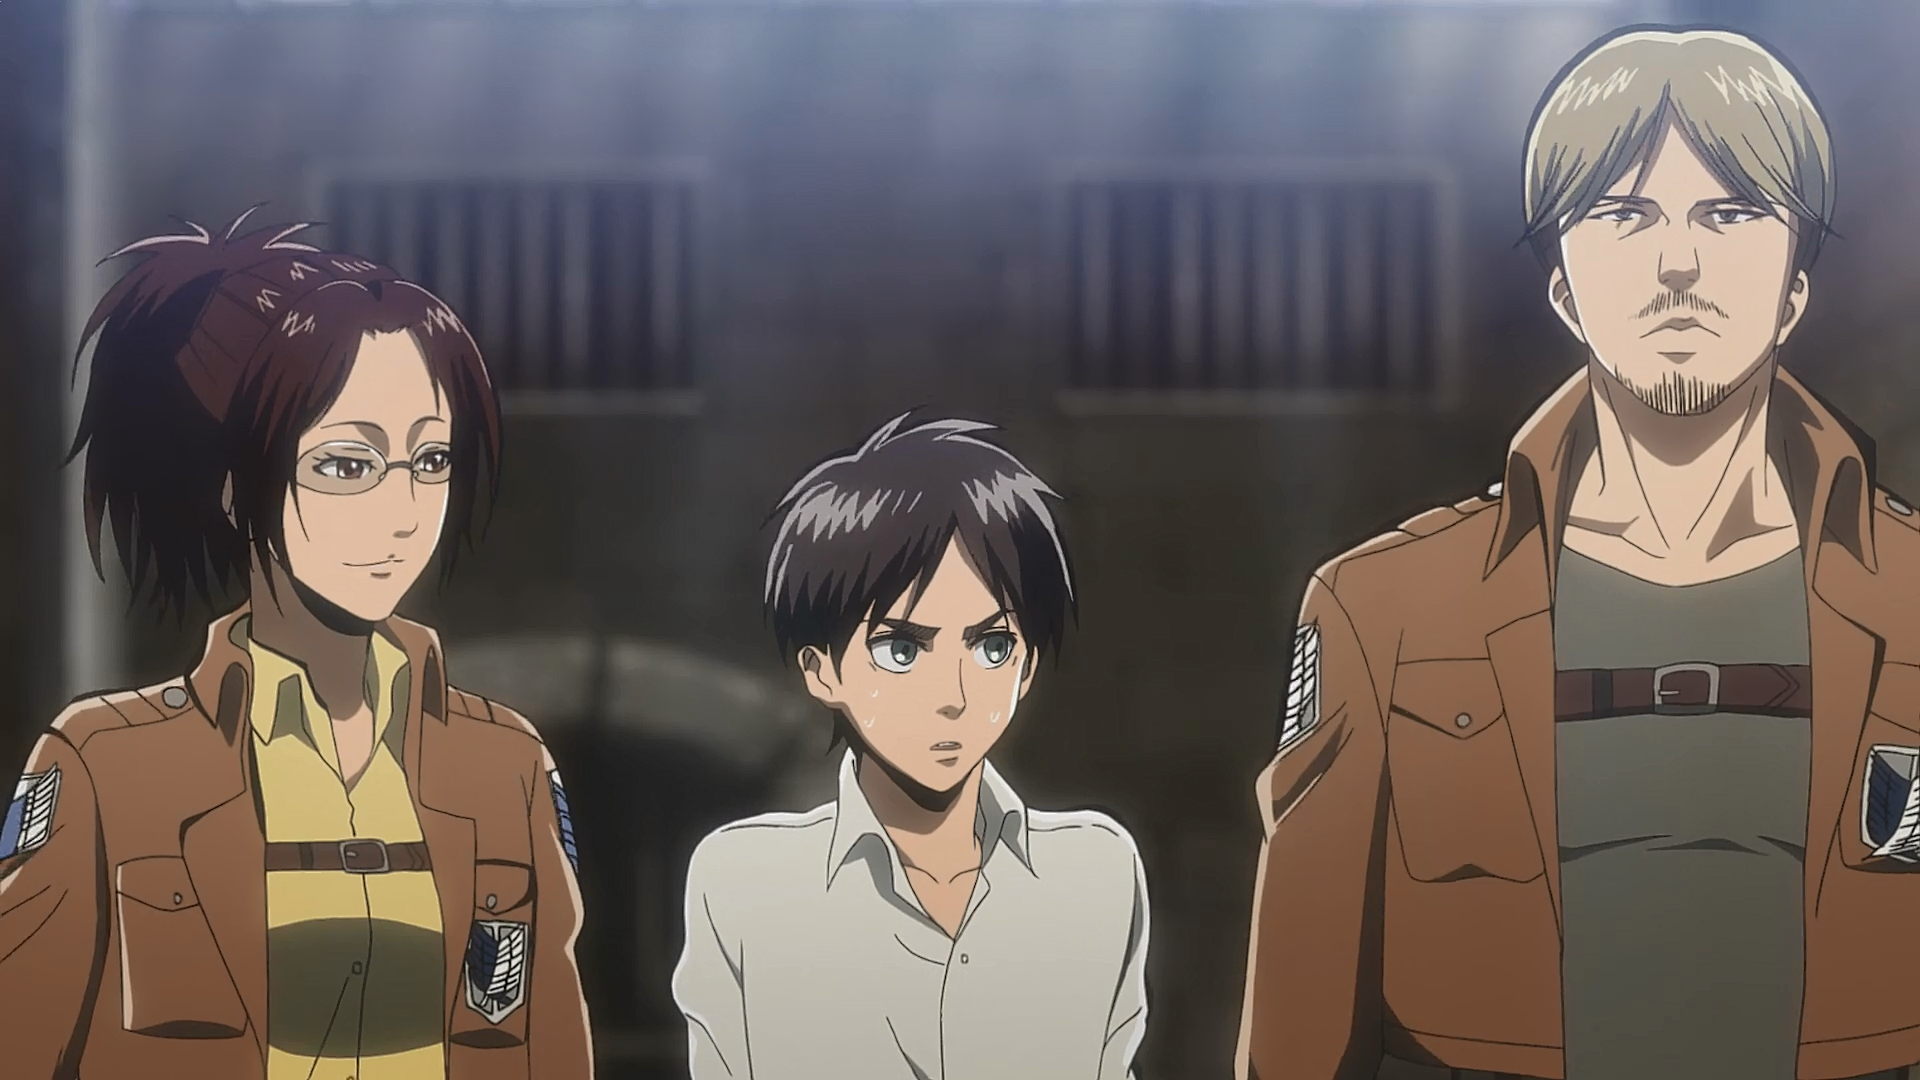 Did Attack on Titan's ending live up to the hype? #attackontitan #anim